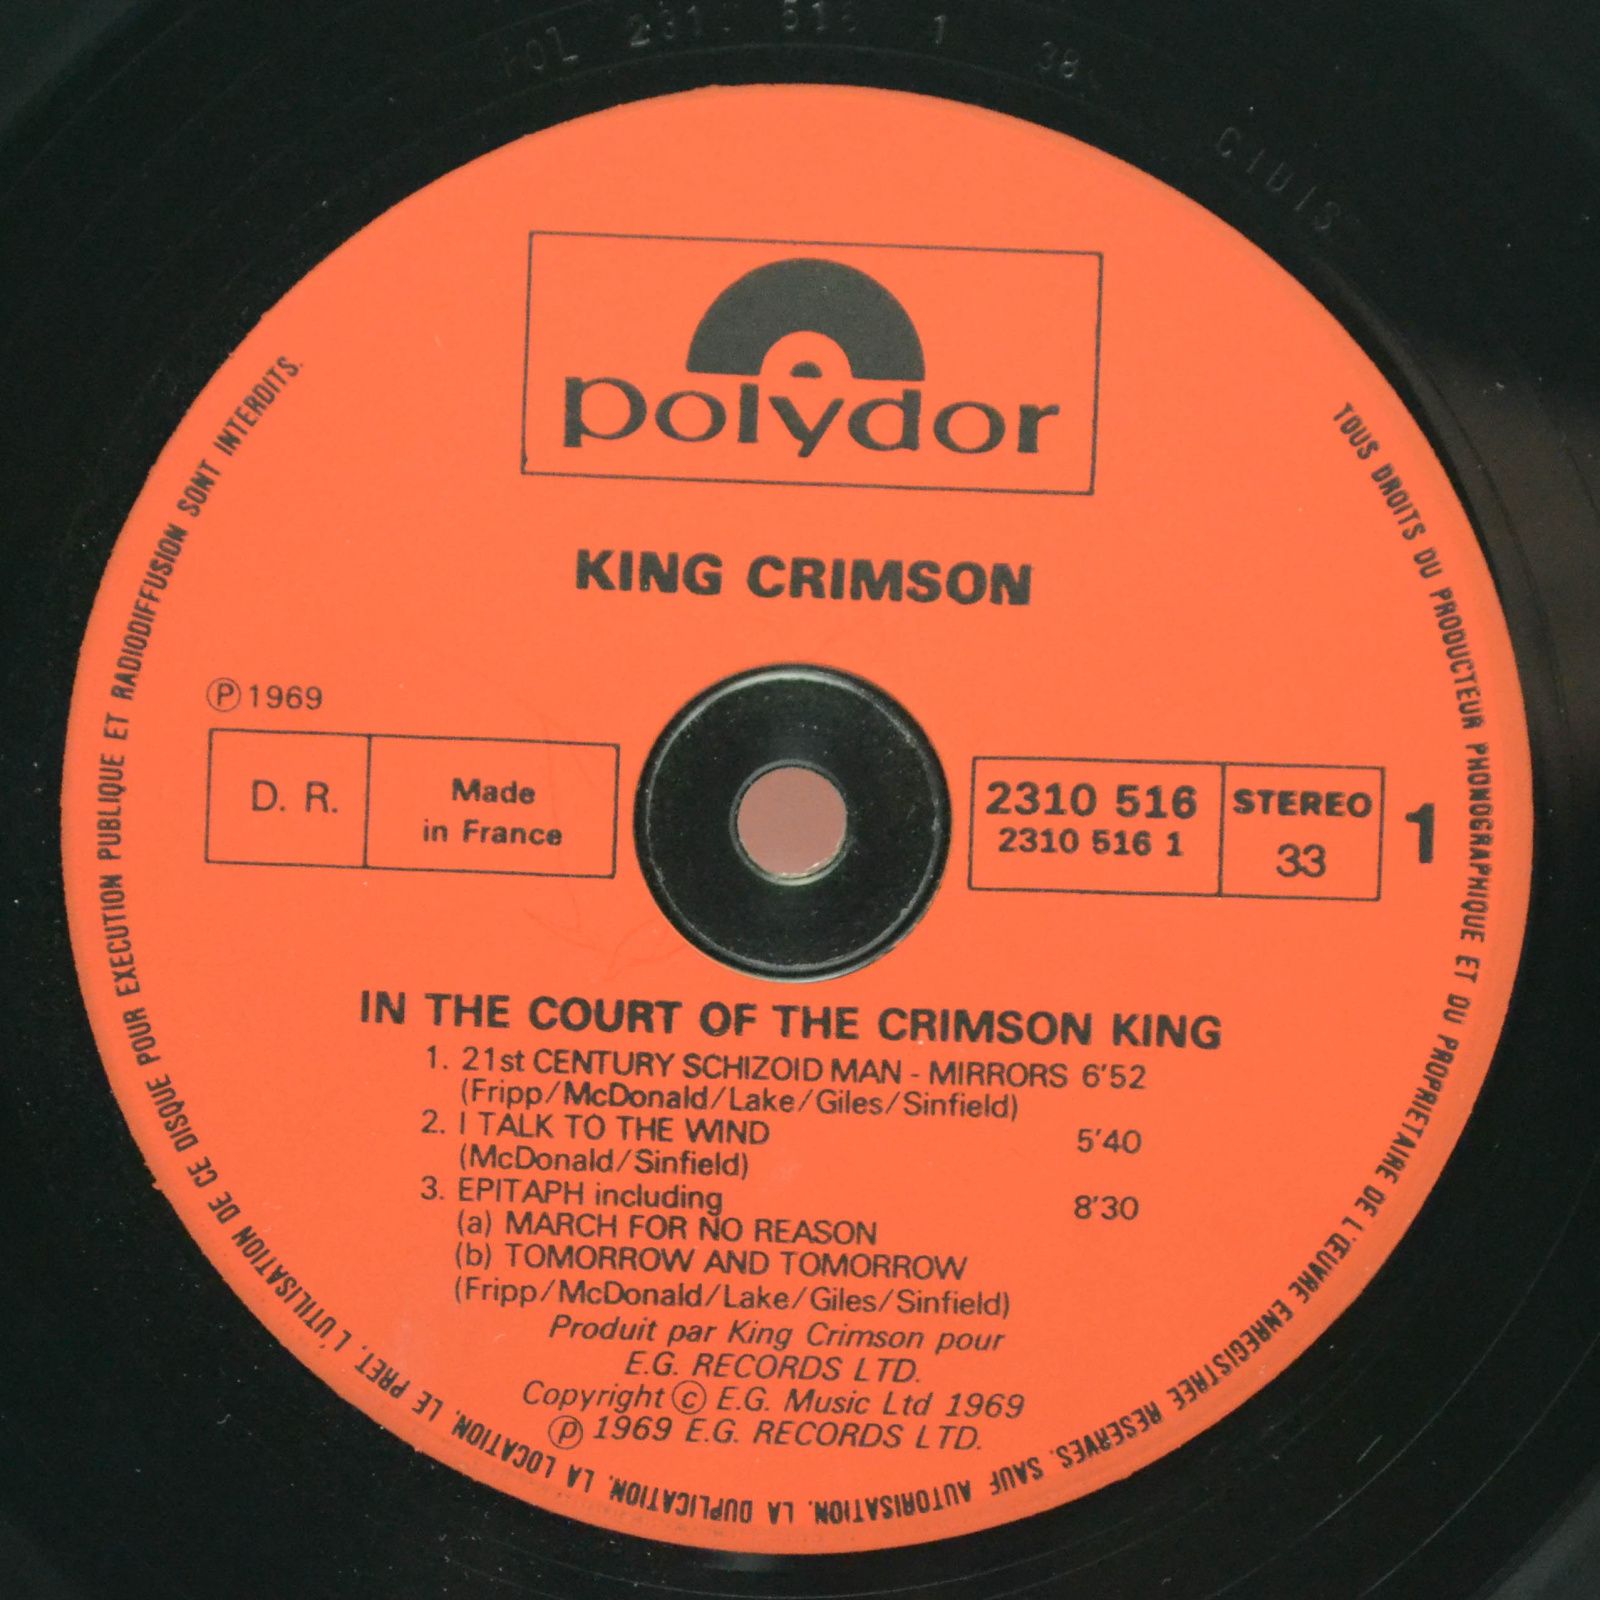 King Crimson — In The Court Of The Crimson King (An Observation By King Crimson), 1969